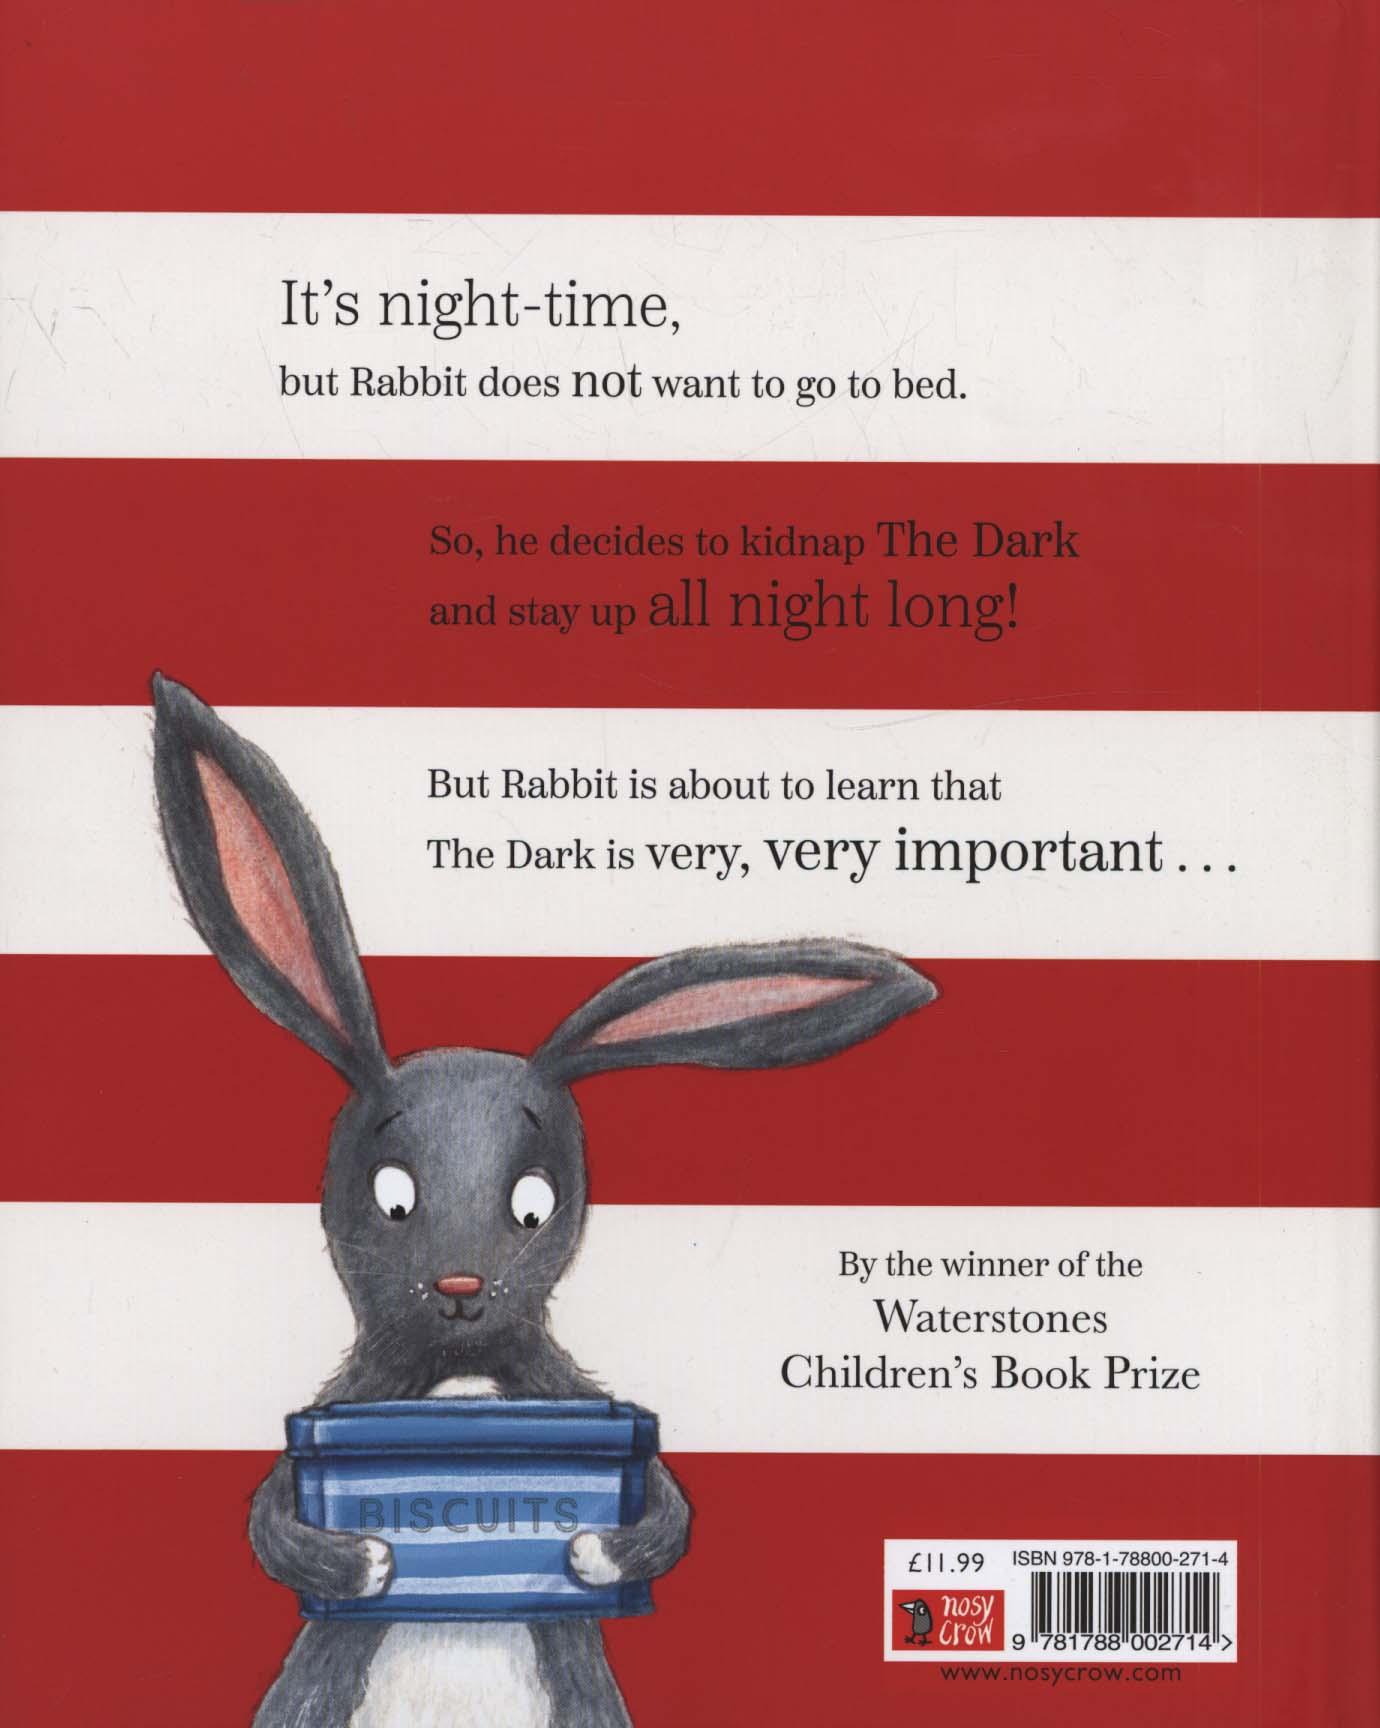 Rabbit, the Dark and the Biscuit Tin